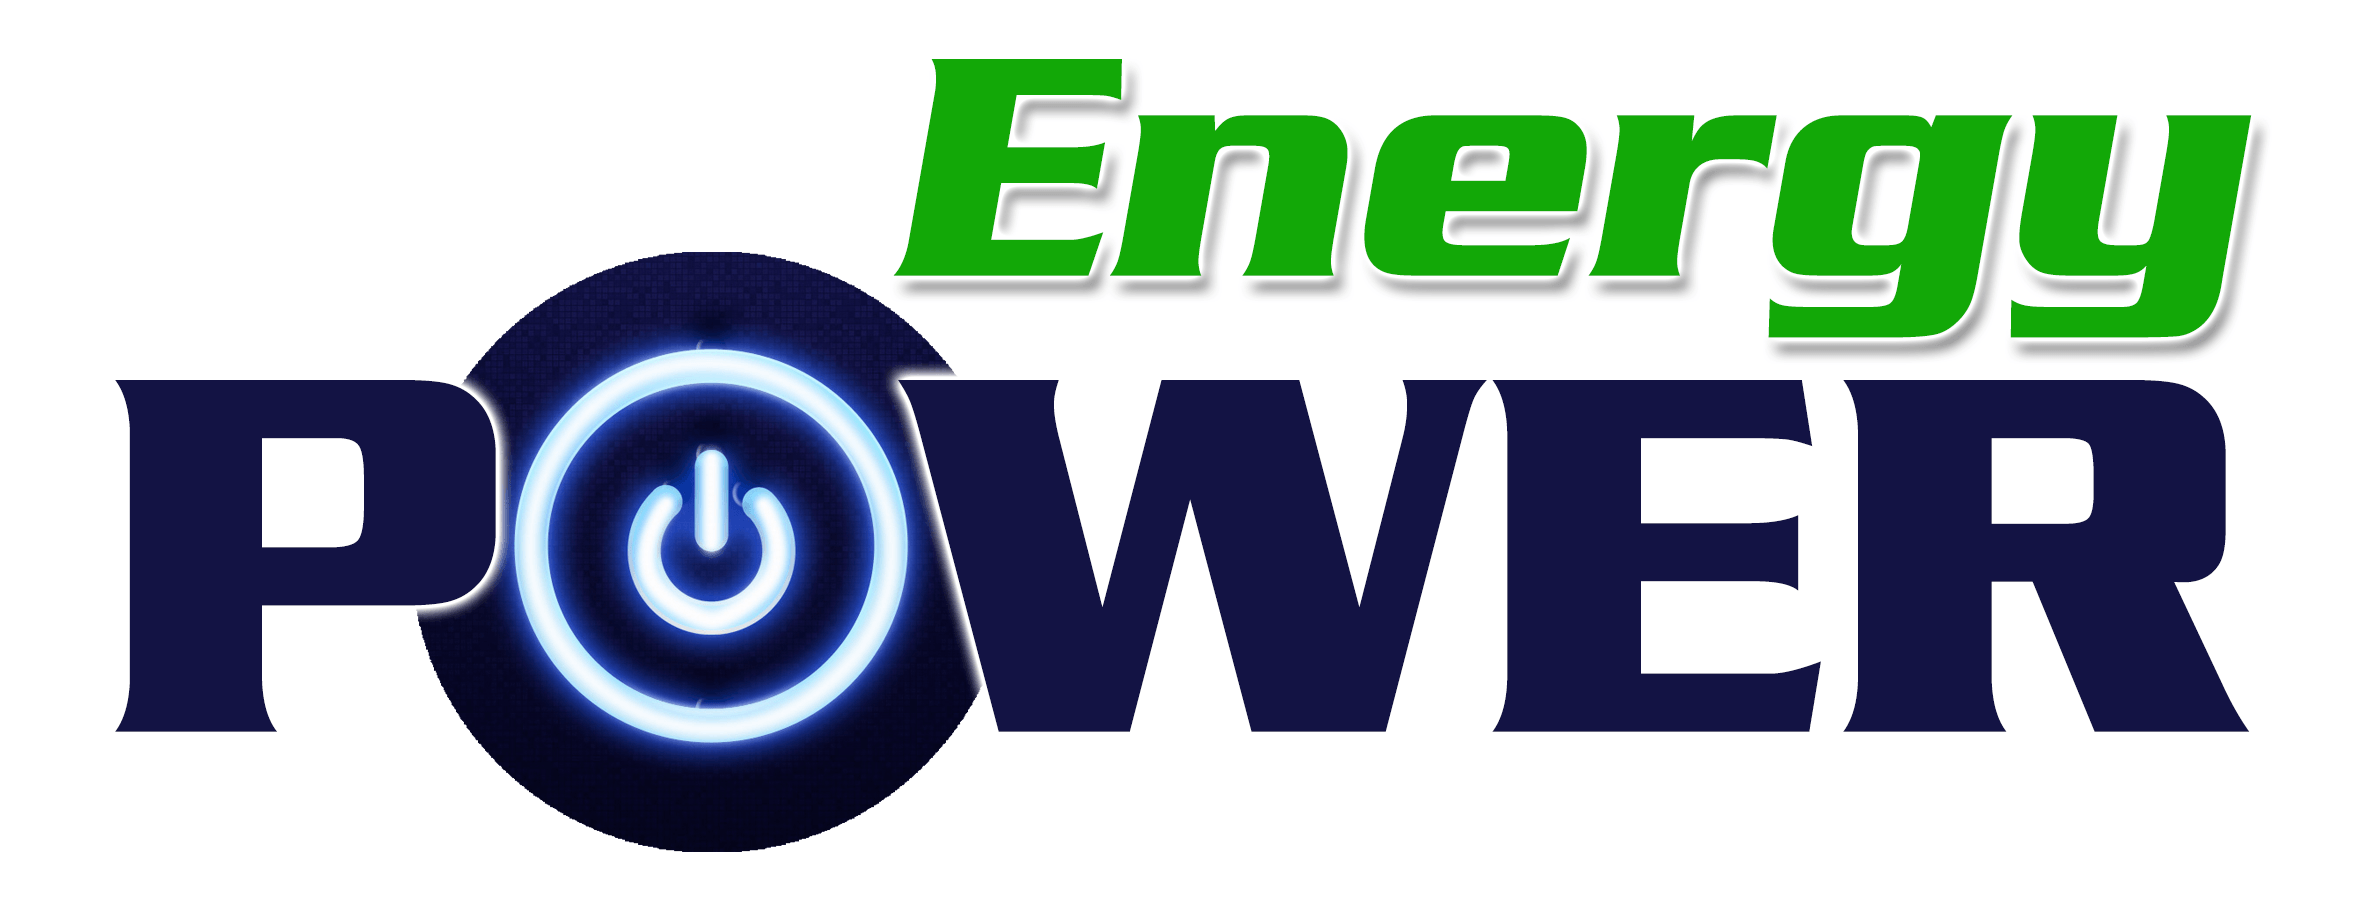 Power Logo - About Us